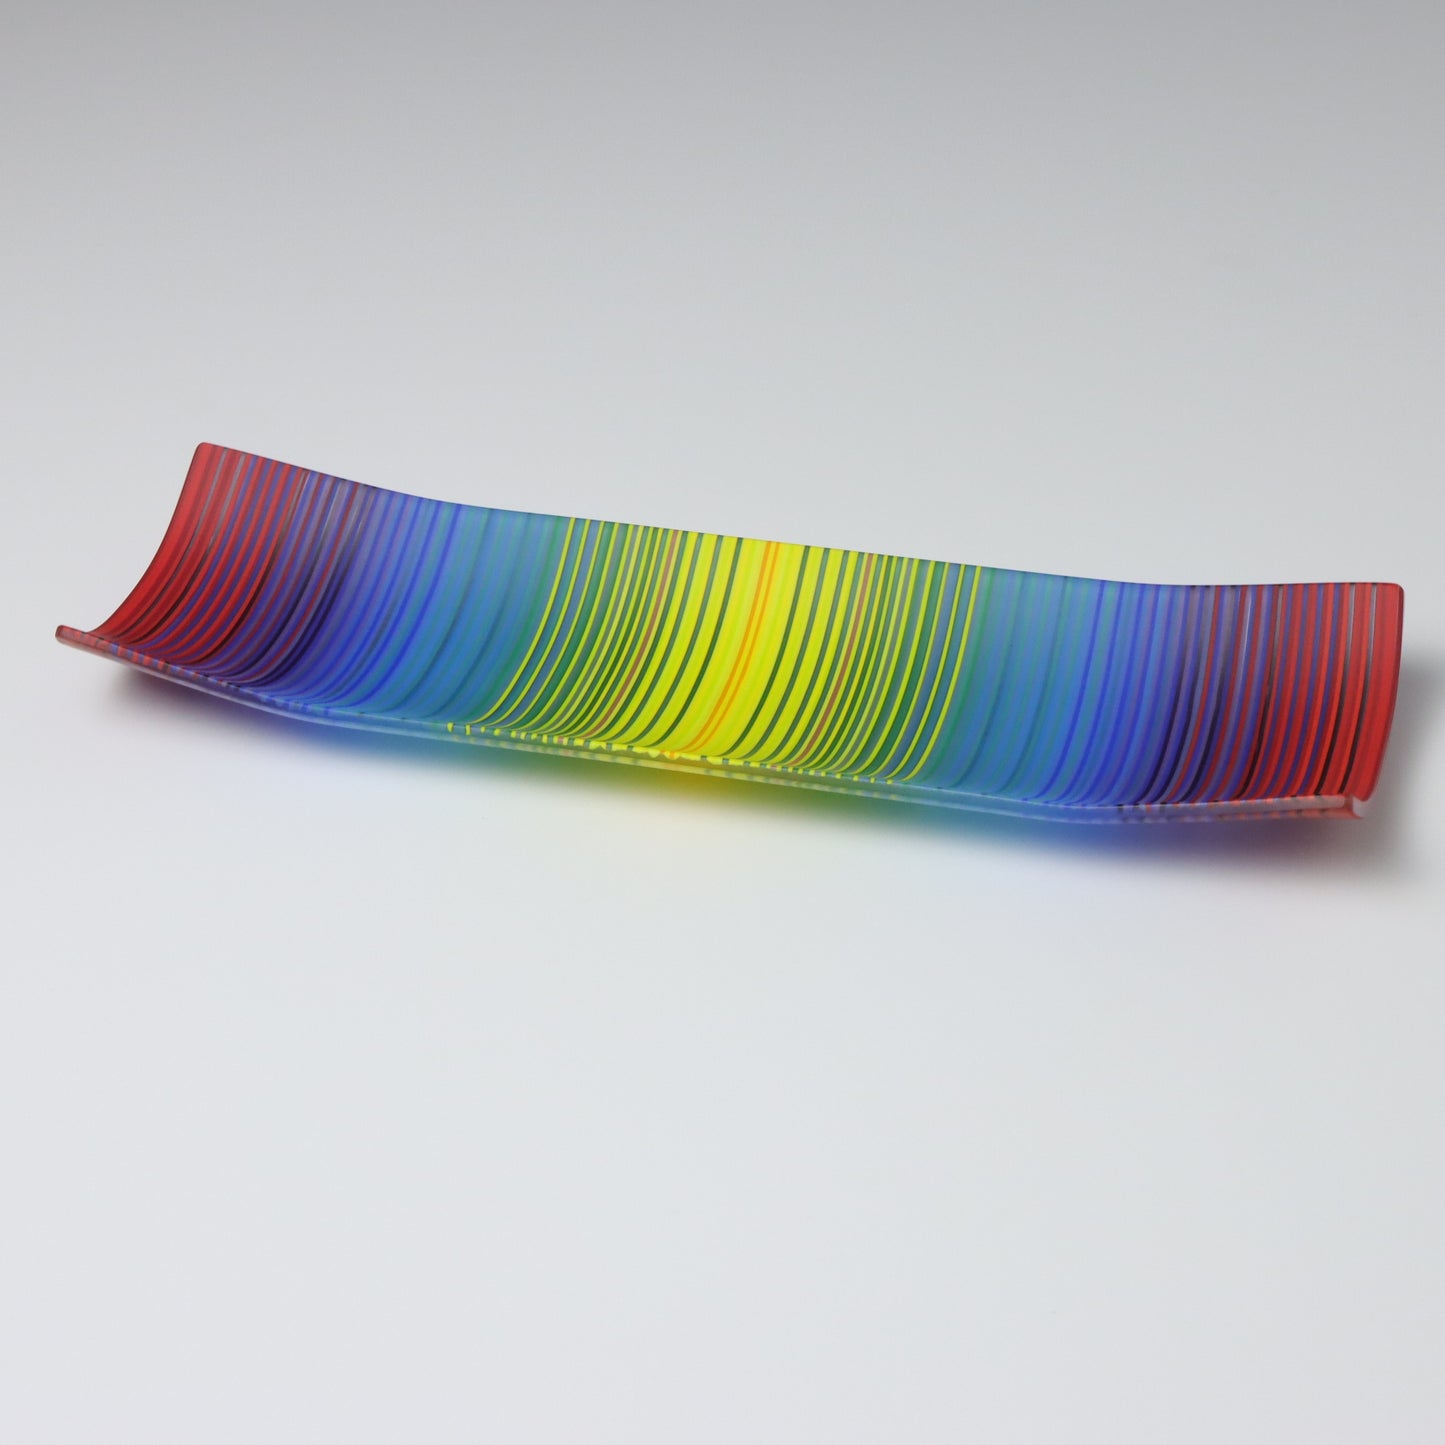 S3729 | Rectangular Shaped ColourWave Glass Plate | Red, Purple, Blue, Green and Yellow